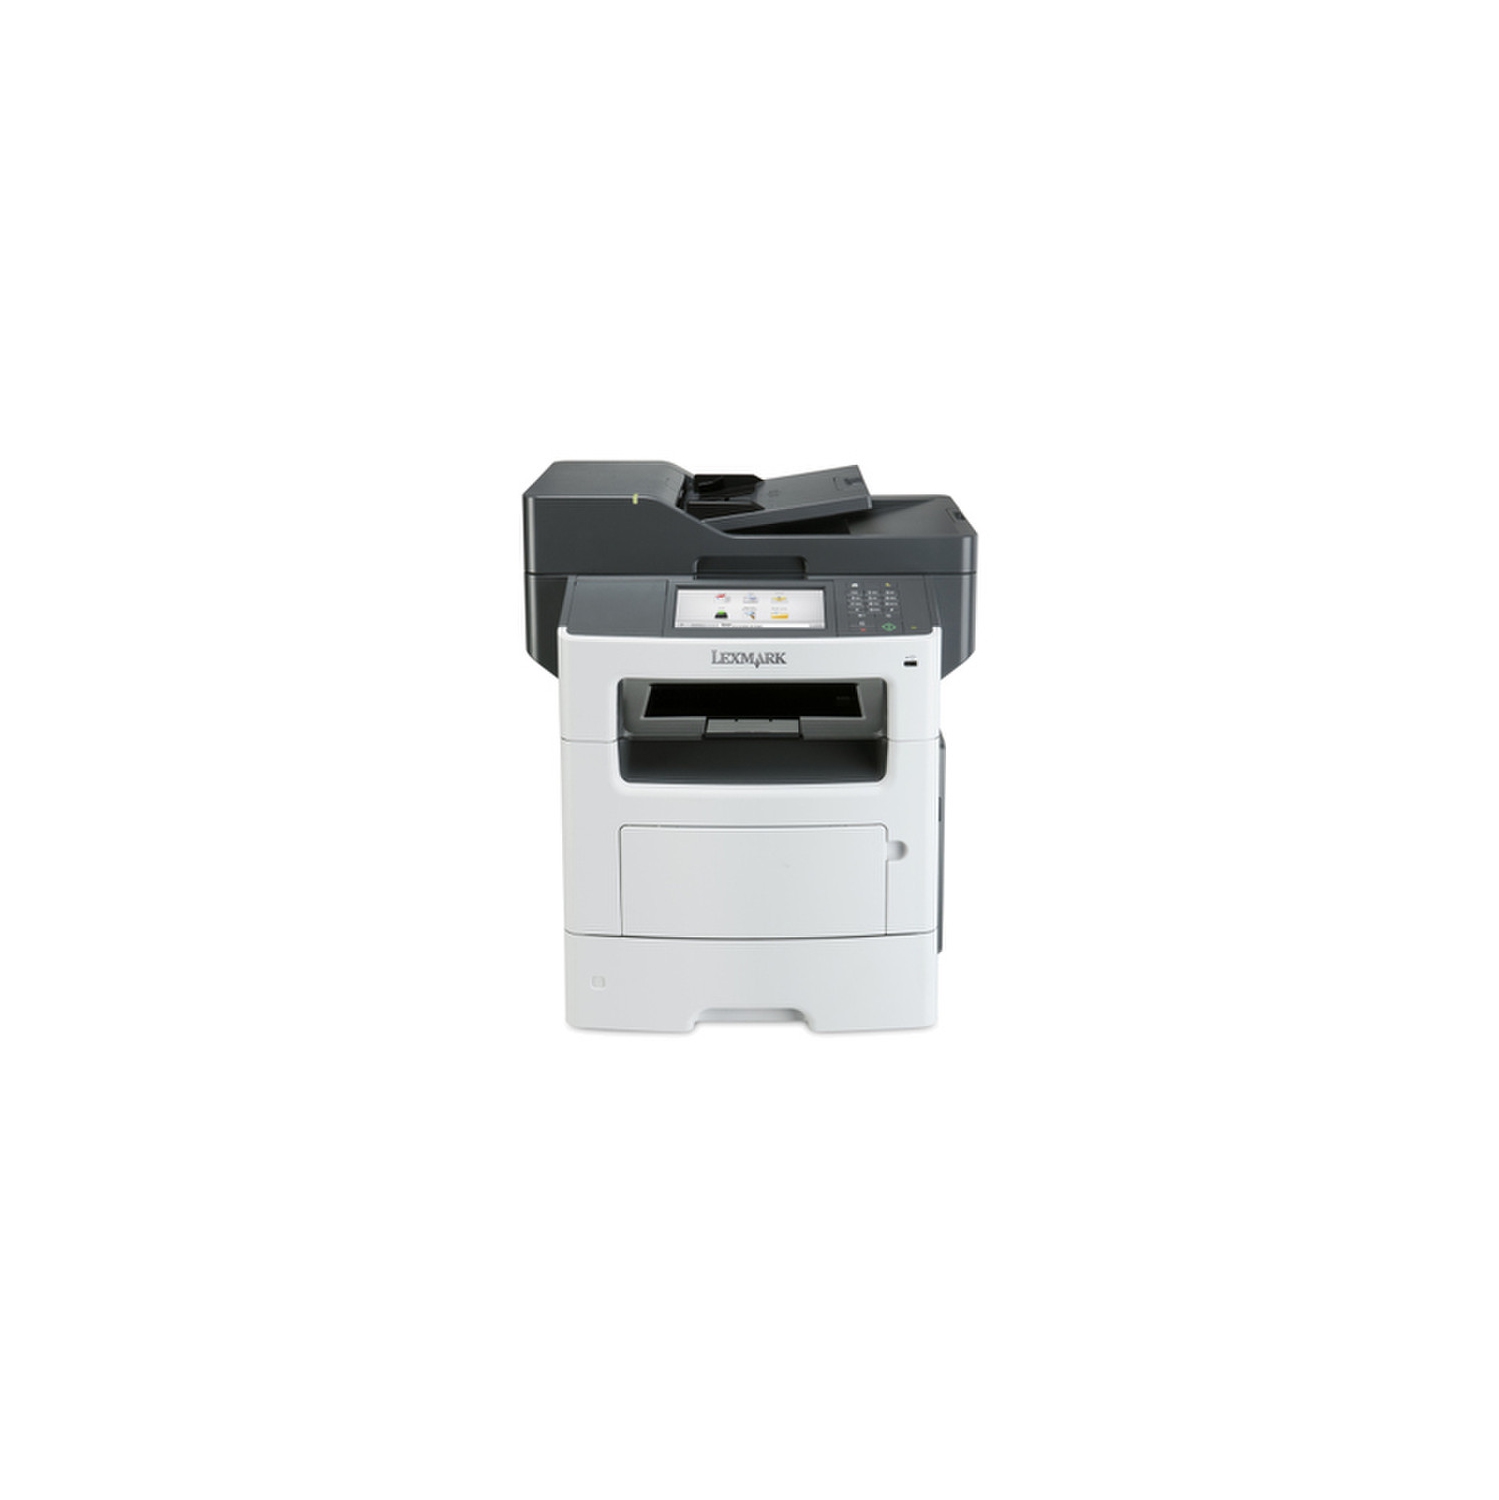 Refurbished (Good) Lexmark MX511dhe MX511 35S5704 Laser All-In-One Printer Copier Scanner Fax Email USB Network duplex Hard Drive With 90 Days Warranty